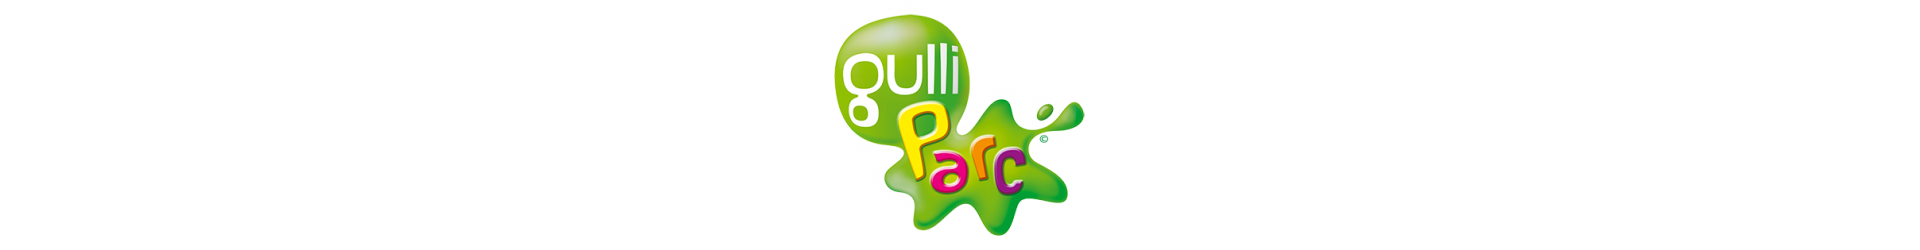 Gulli Parc Personalized Objects Kit for Children | Children's Goodies